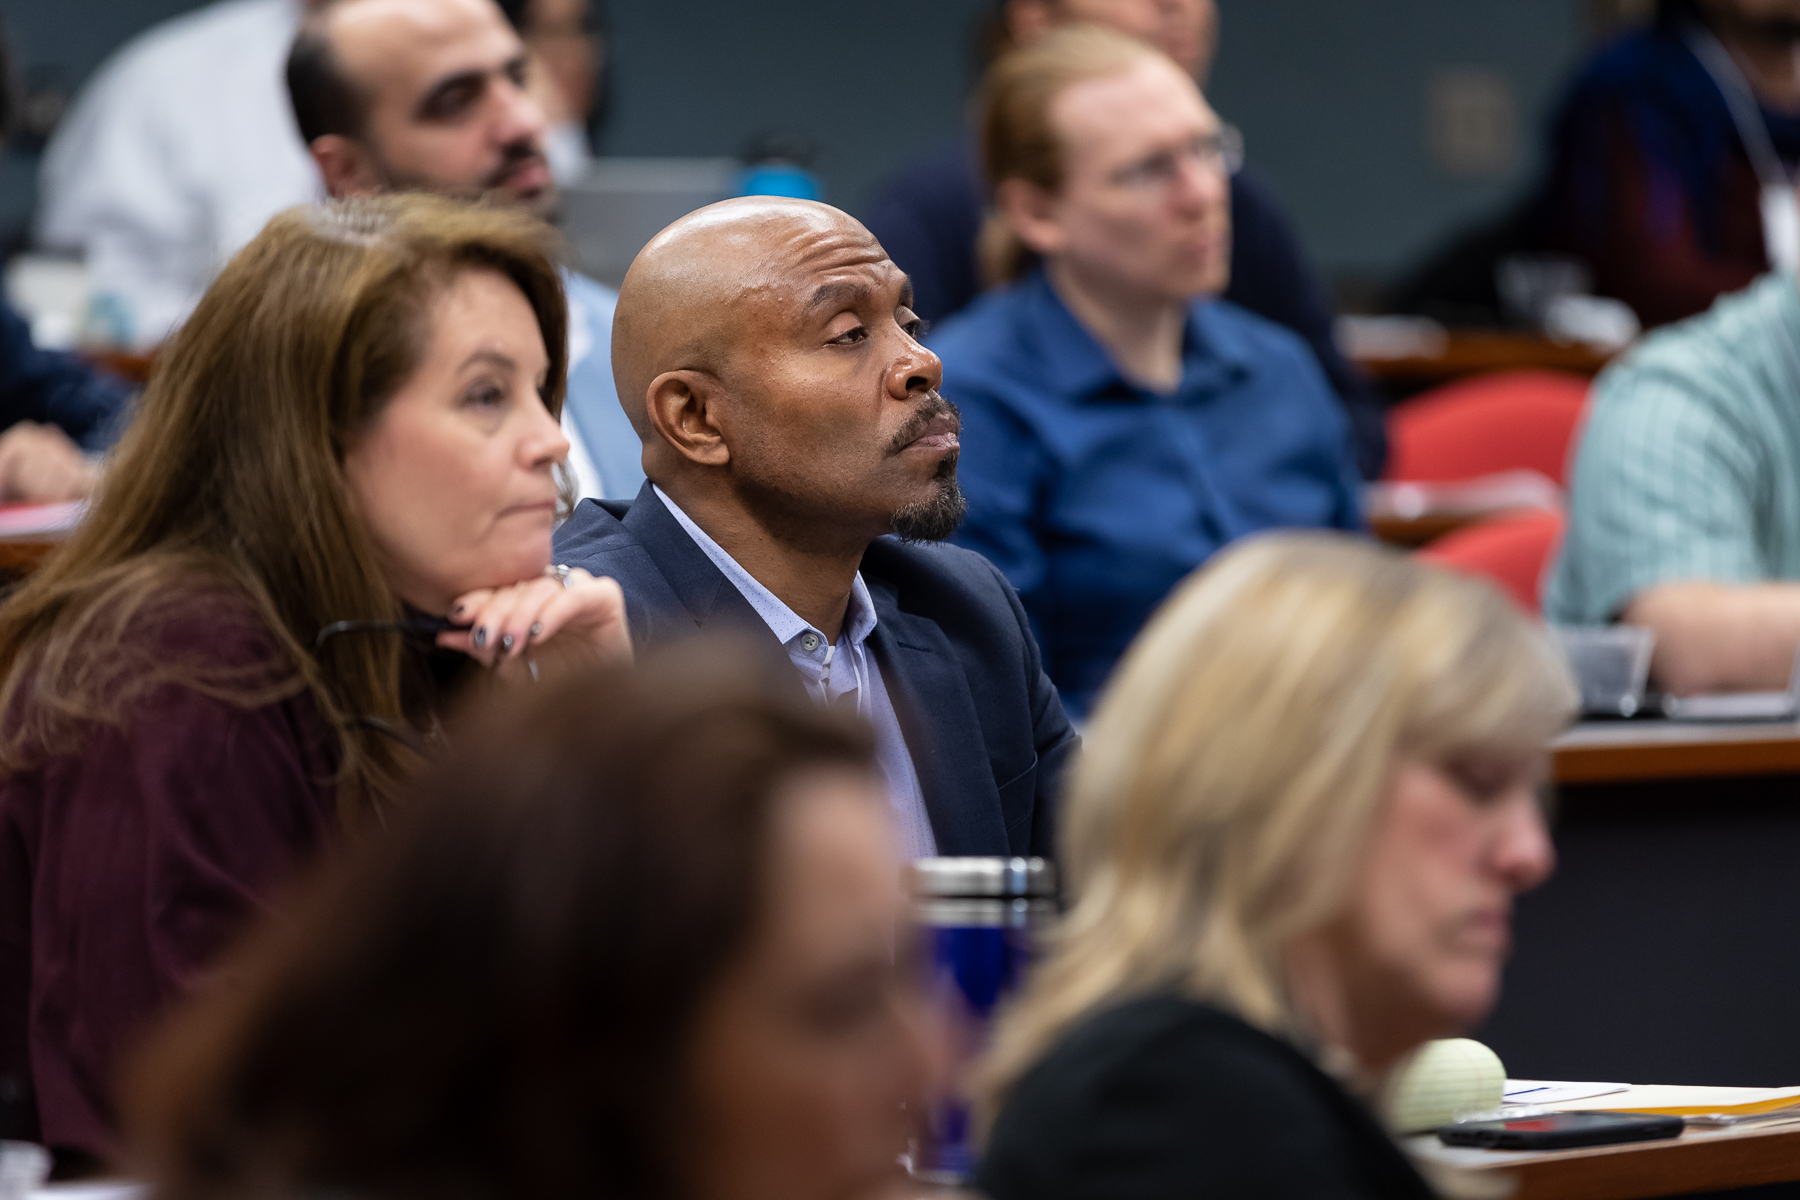 The Academic Growth and Innovation Fund program was established in 2018 to find, encourage and support innovative ideas that will positively impact DePaul revenue within the next three years. (DePaul University/Jeff Carrion)